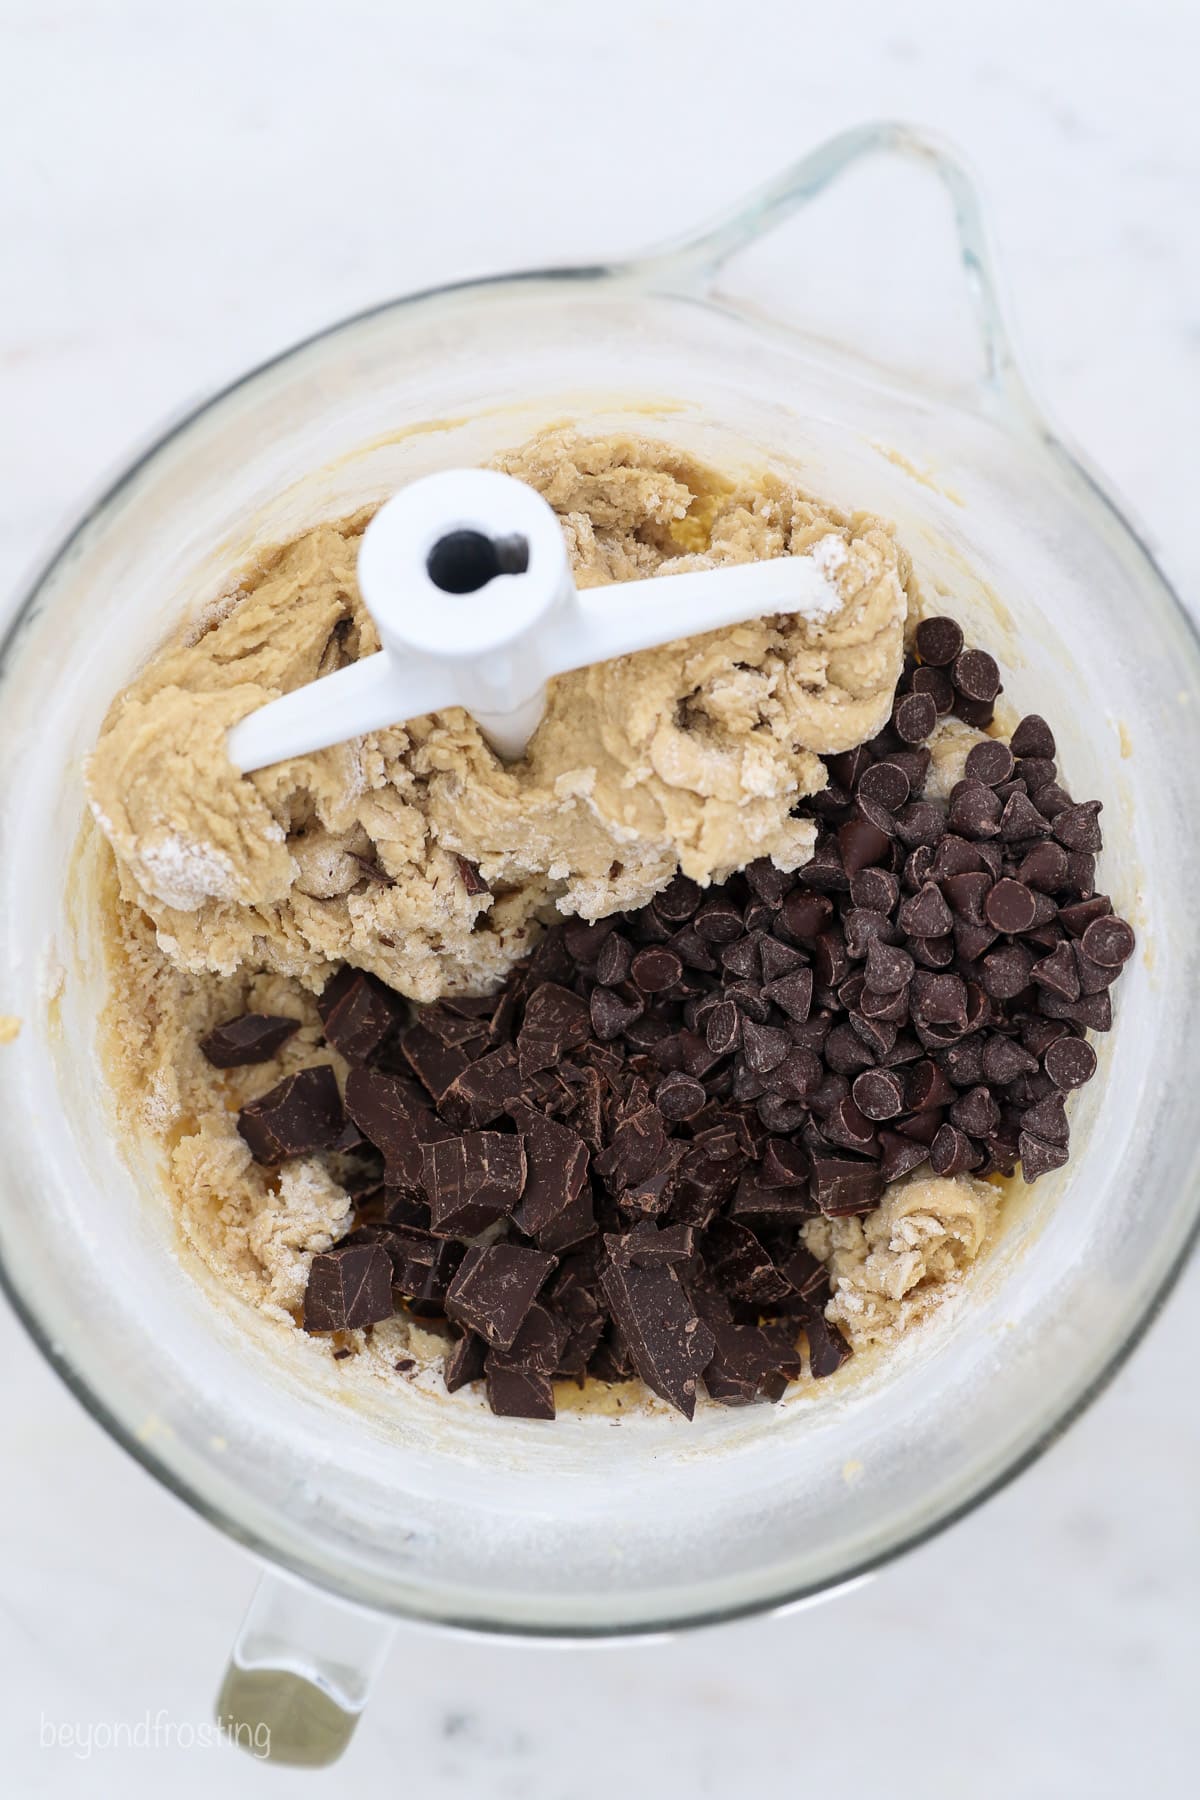 A stand mixer attachment resting in a glass bowl with chocolate chips added to cookie dough.